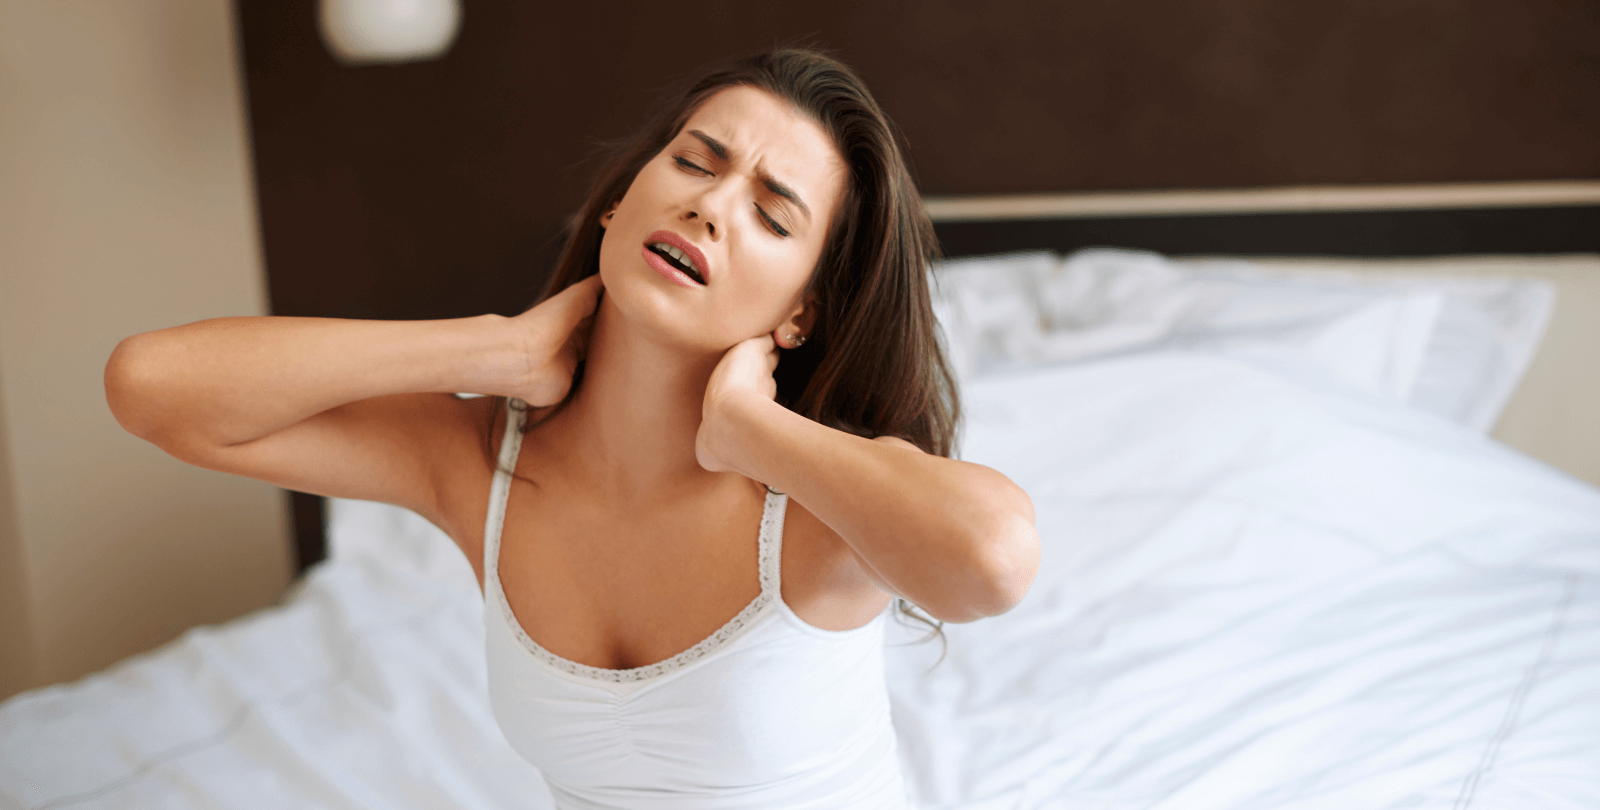 Anxiety & Neck Pain: Understand The Connection Between Them